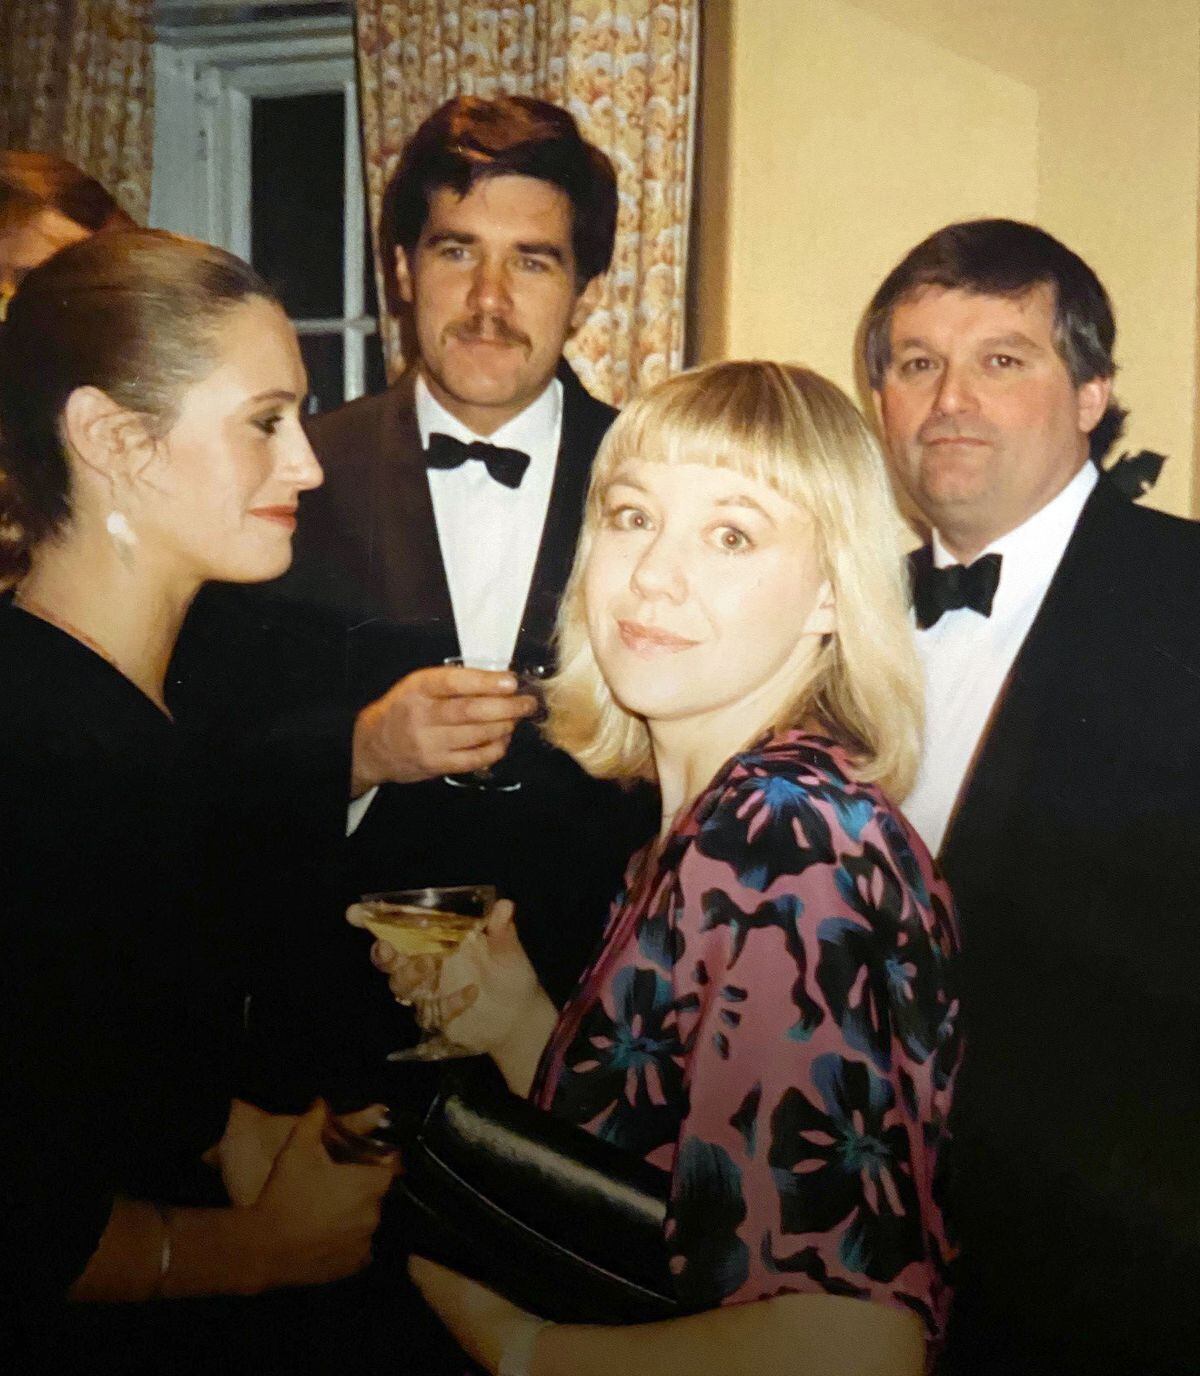 John (with moustache) and his then wife Anne on the left at an evening gathering hosted by Gerald and Ann Acton in Broad Street, Ludlow, in about 1985. John says: "Far right is Roger Evans, who has become quite renowned in farming circles for his quaint and amusing publications regarding agriculture."